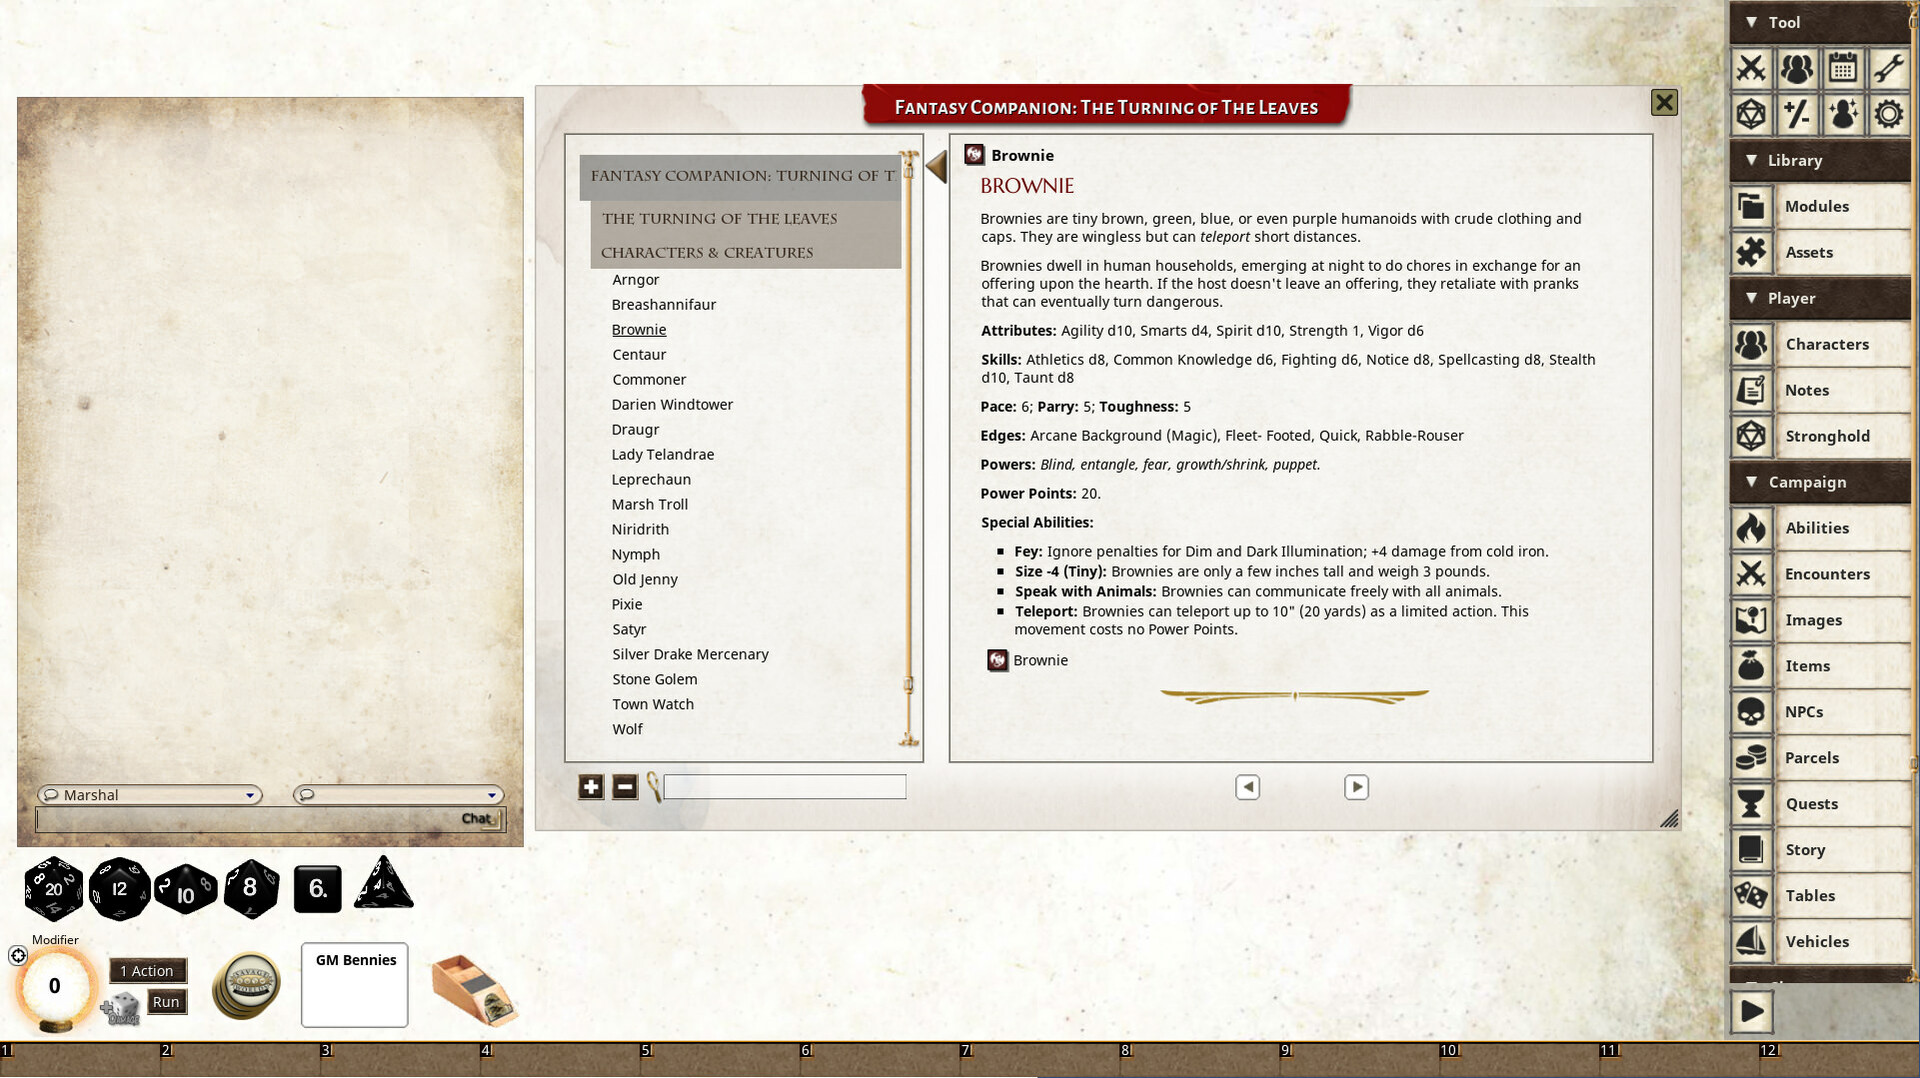 Fantasy Grounds - The Turning of the Leaves Fantasy Adventure Featured Screenshot #1